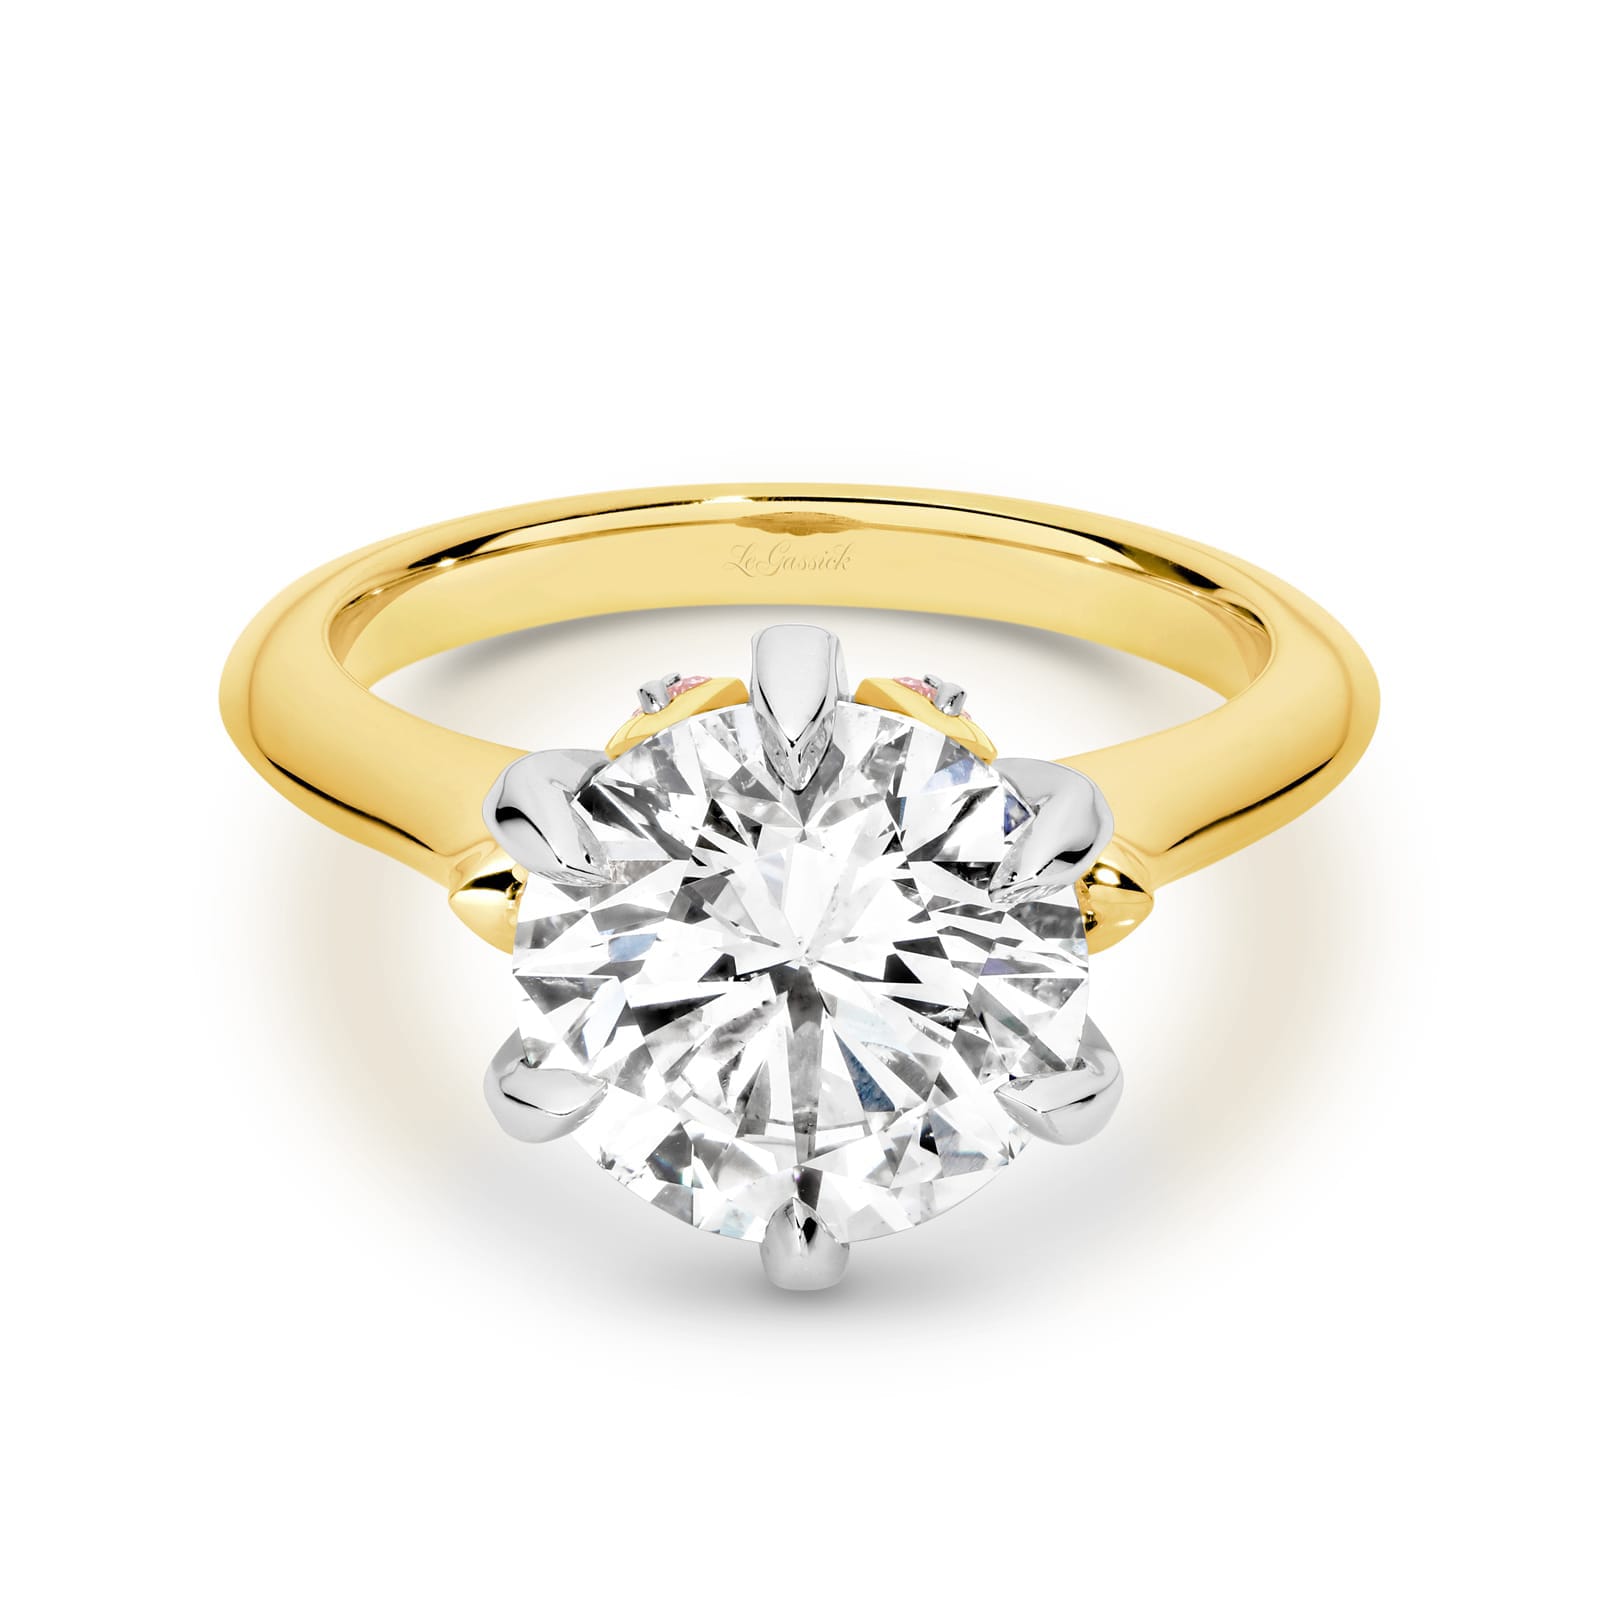 Genevieve 5ct Round Brilliant Cut Solitaire Diamond Ring part of The Beyond Luxury Collection by LeGassick.